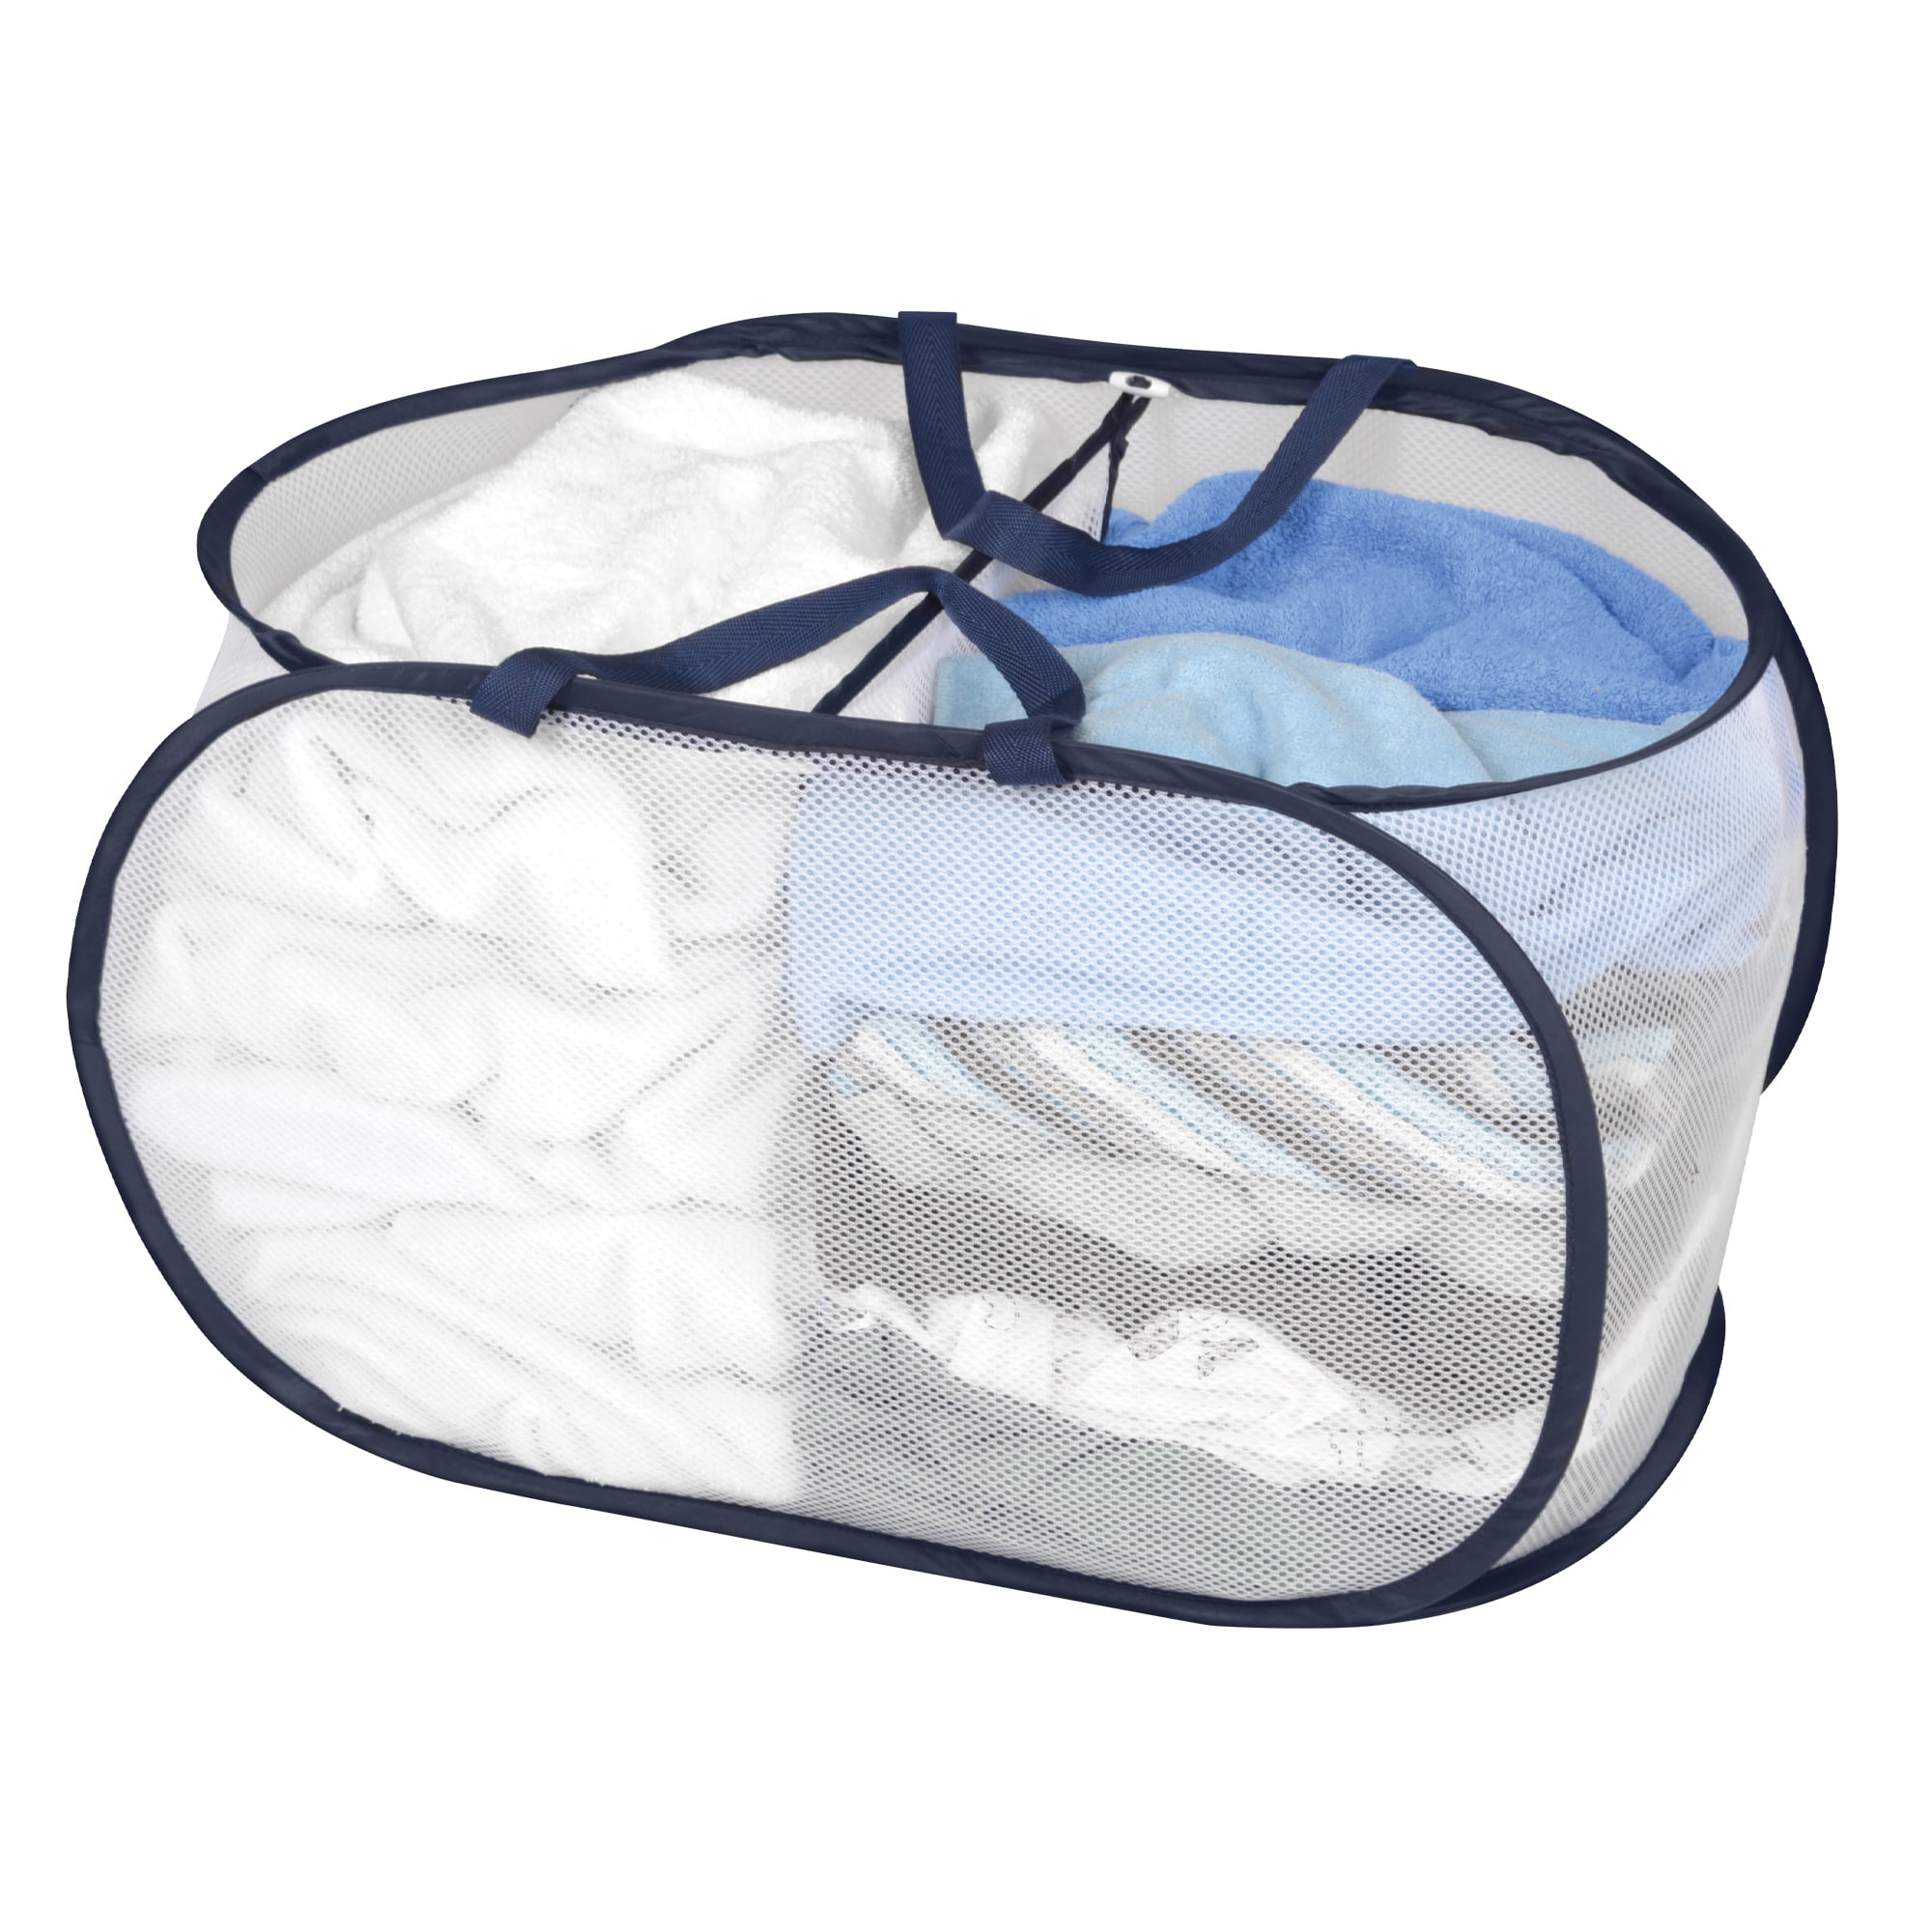 Three Compartment Popup Hamper Folds for Storage Durable Mesh Material Folding Pop-Up Laundry Hampers are Great for College Dorm or Travel. Black Handles to Carry Easily to The Laundry Room